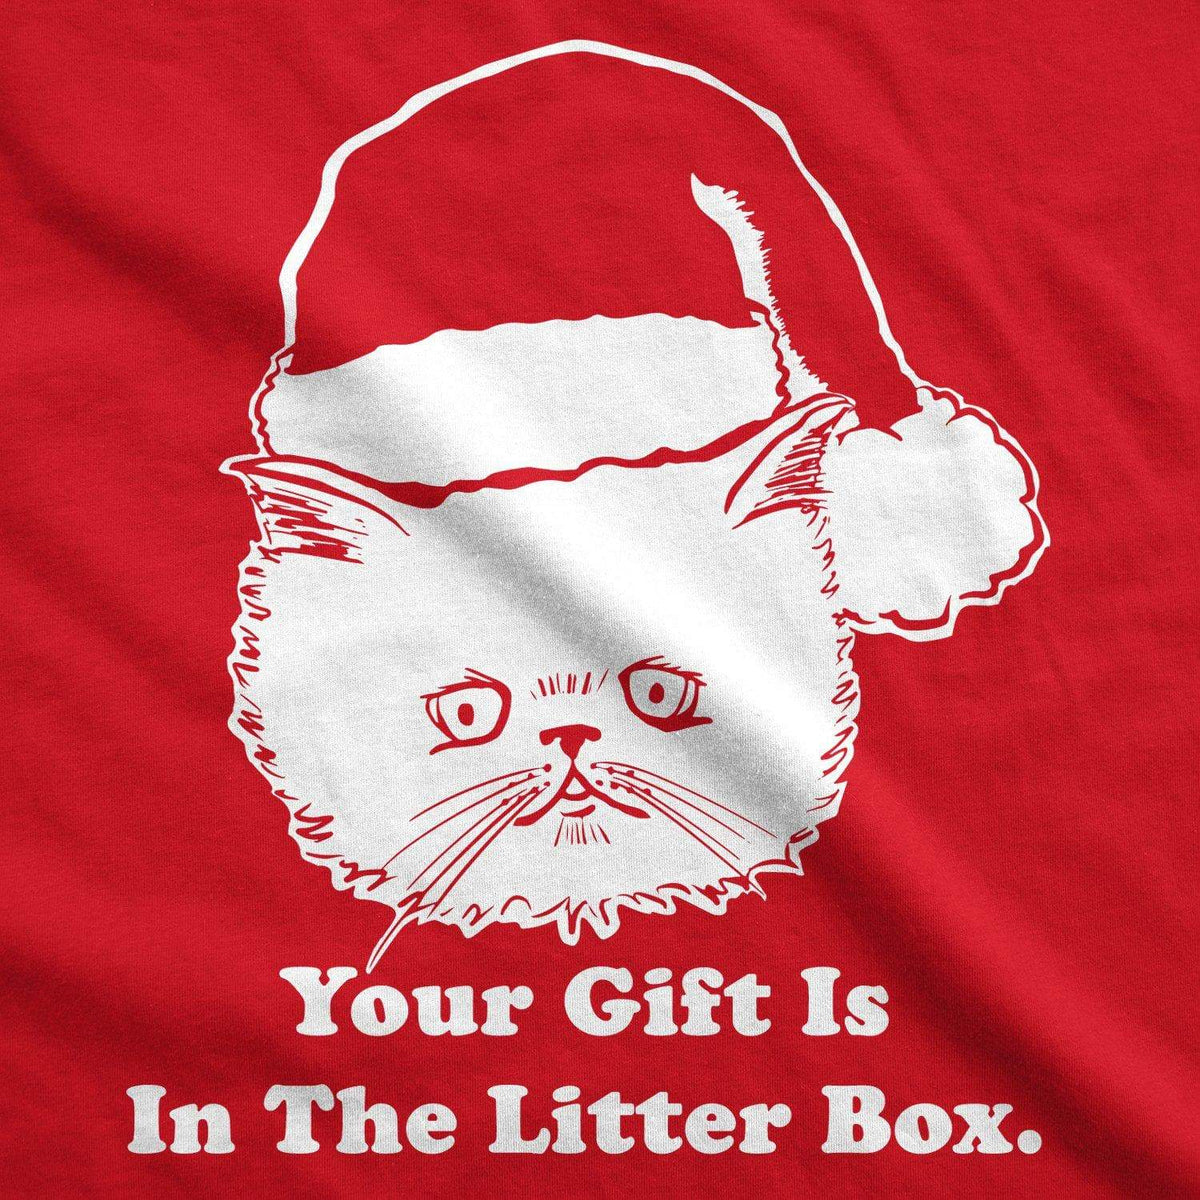 Gift Is In The Litter Box Women&#39;s Tshirt - Crazy Dog T-Shirts